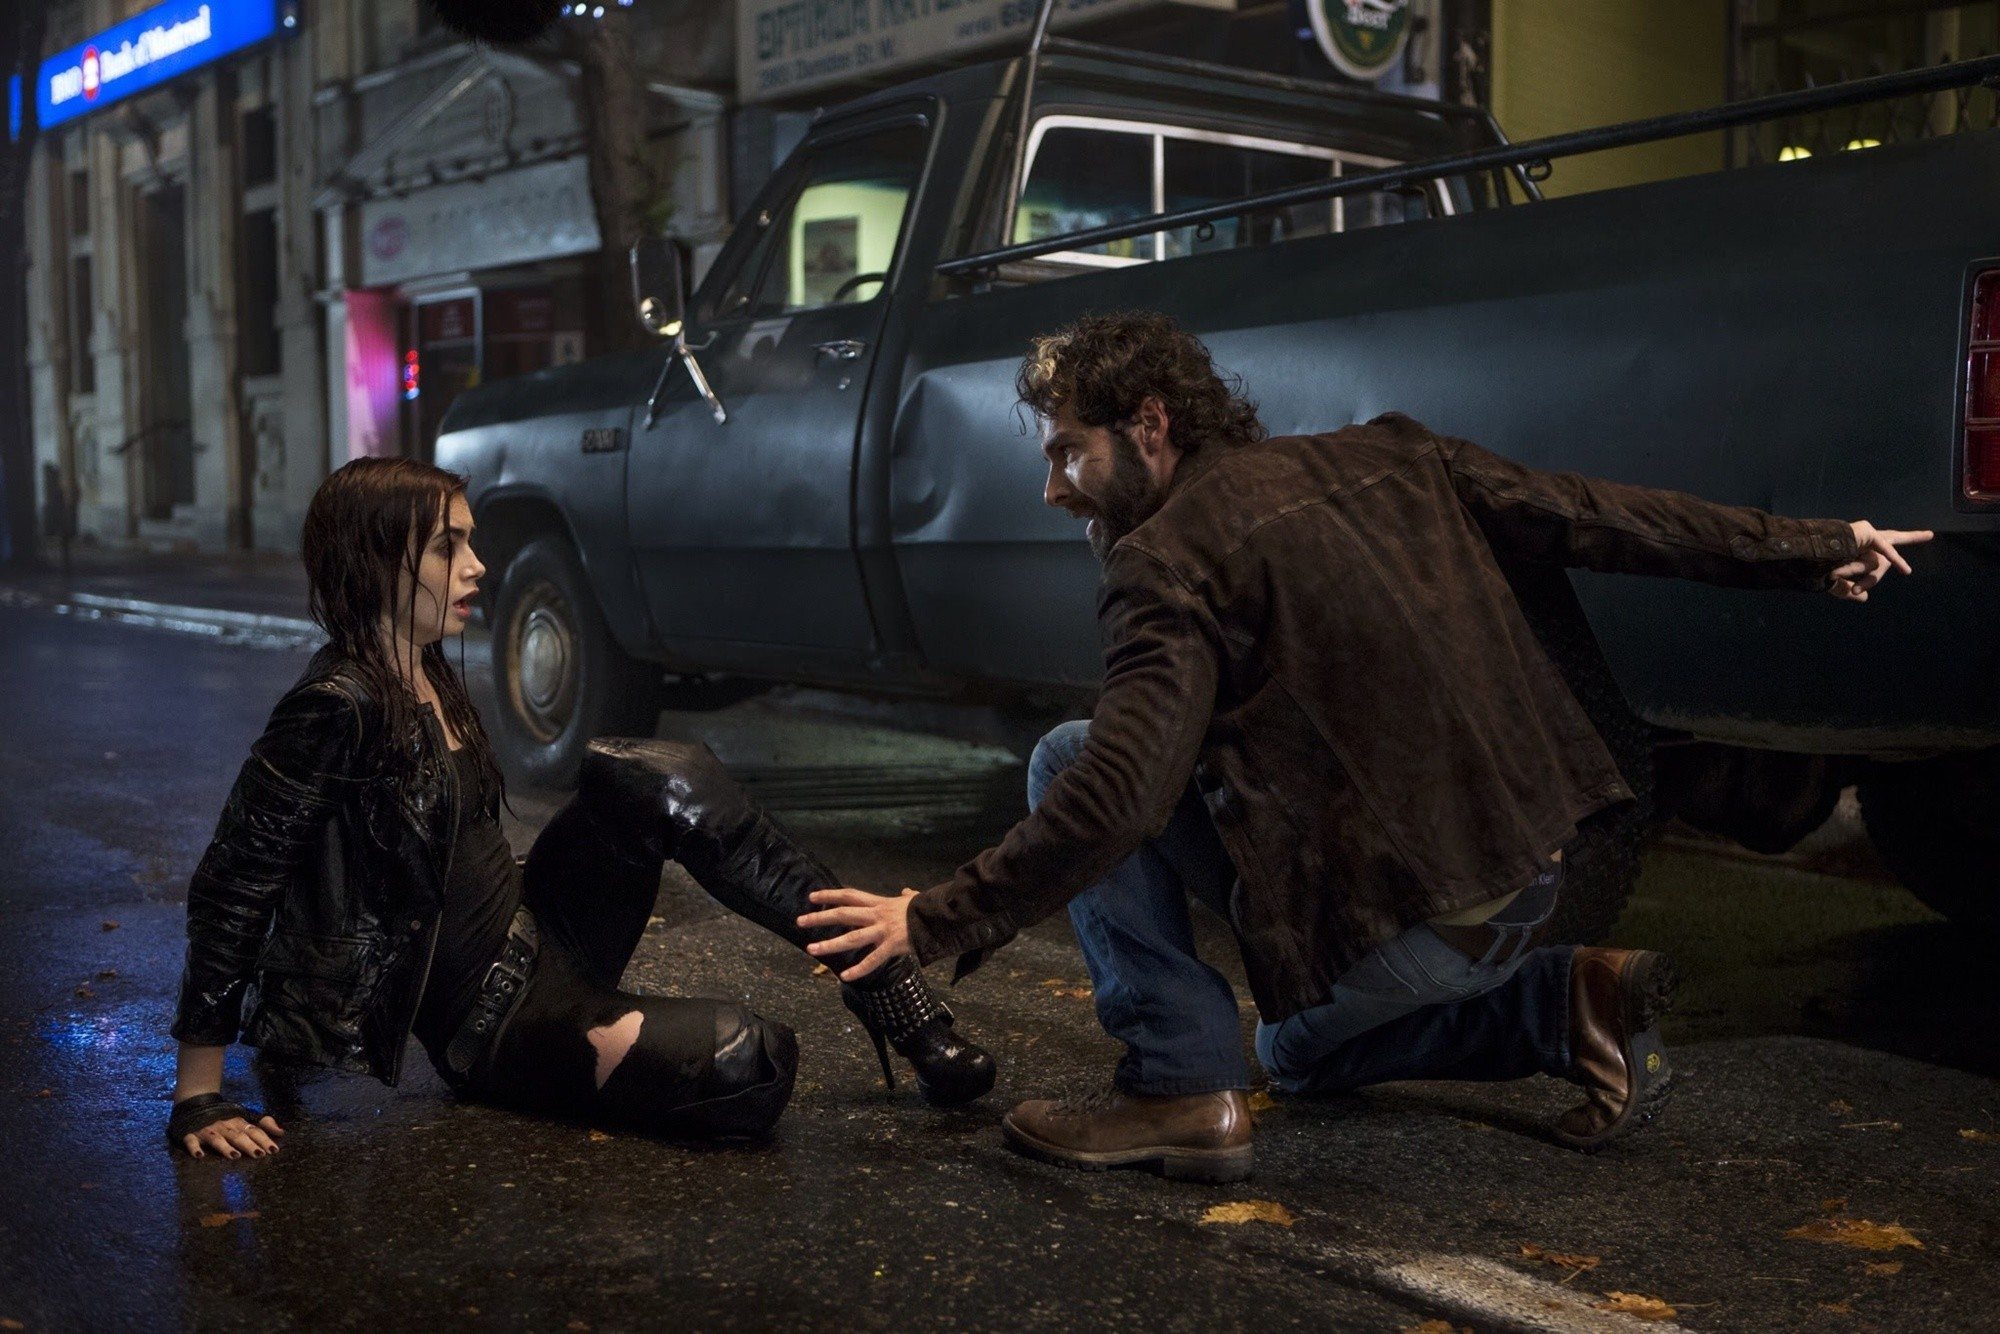 Lily Collins stars as Clary Fray and Aidan Turner stars as Luke in Screen Gems' The Mortal Instruments: City of Bones (2013). Photo credit by Rafy.